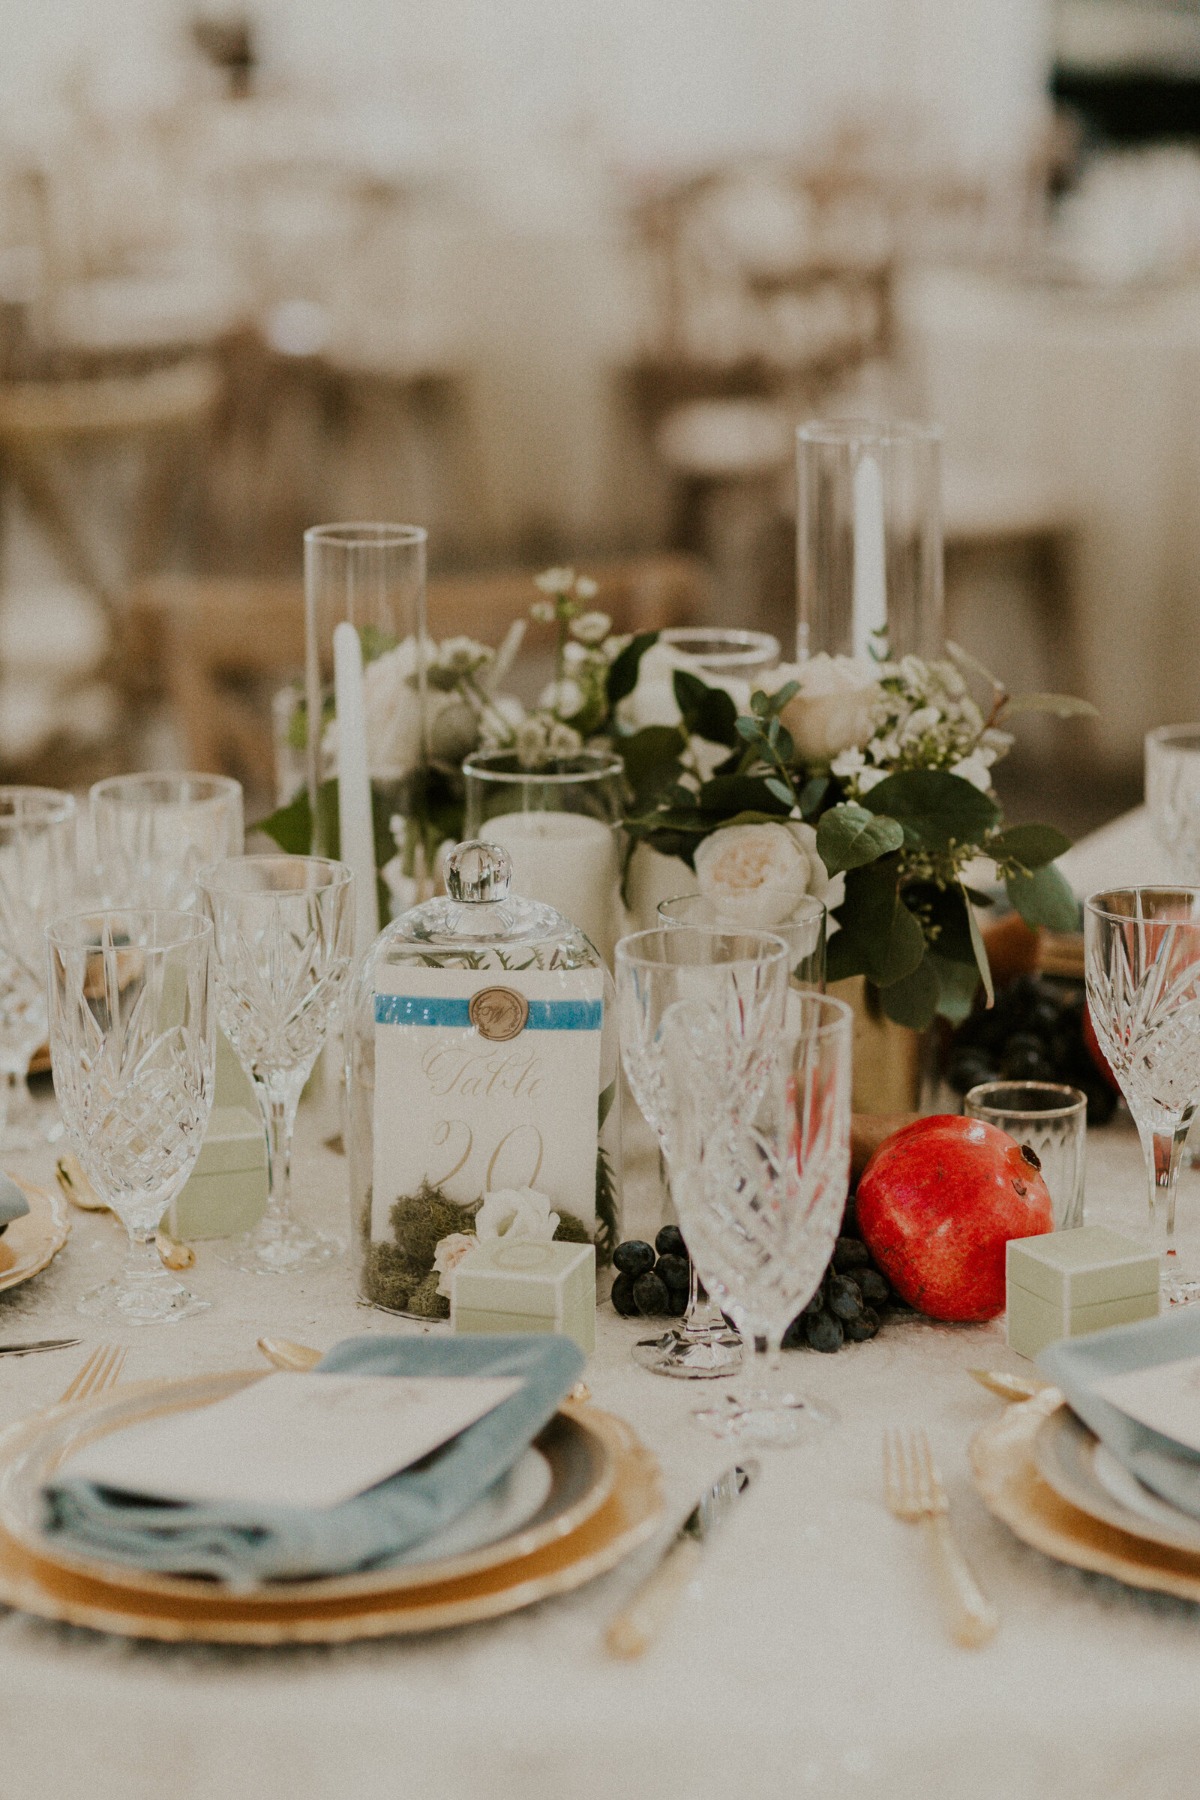 Close-up of reception centerpiece with table number and crystal glasses